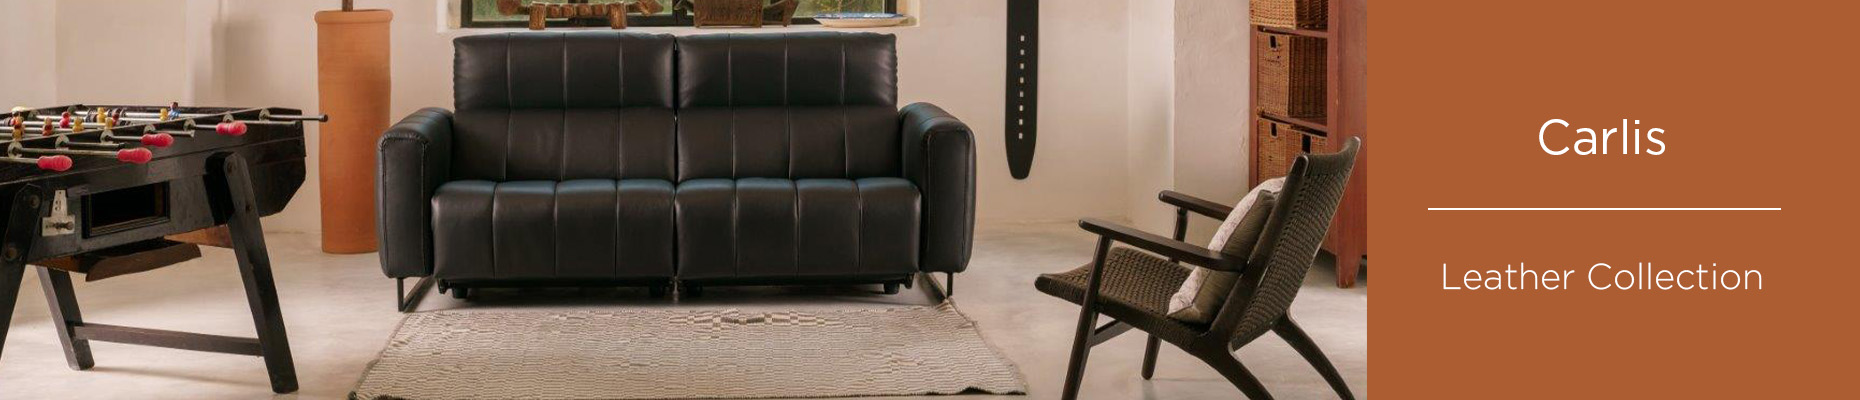 Carlis Leather sofa collection at Forrest Furnishing